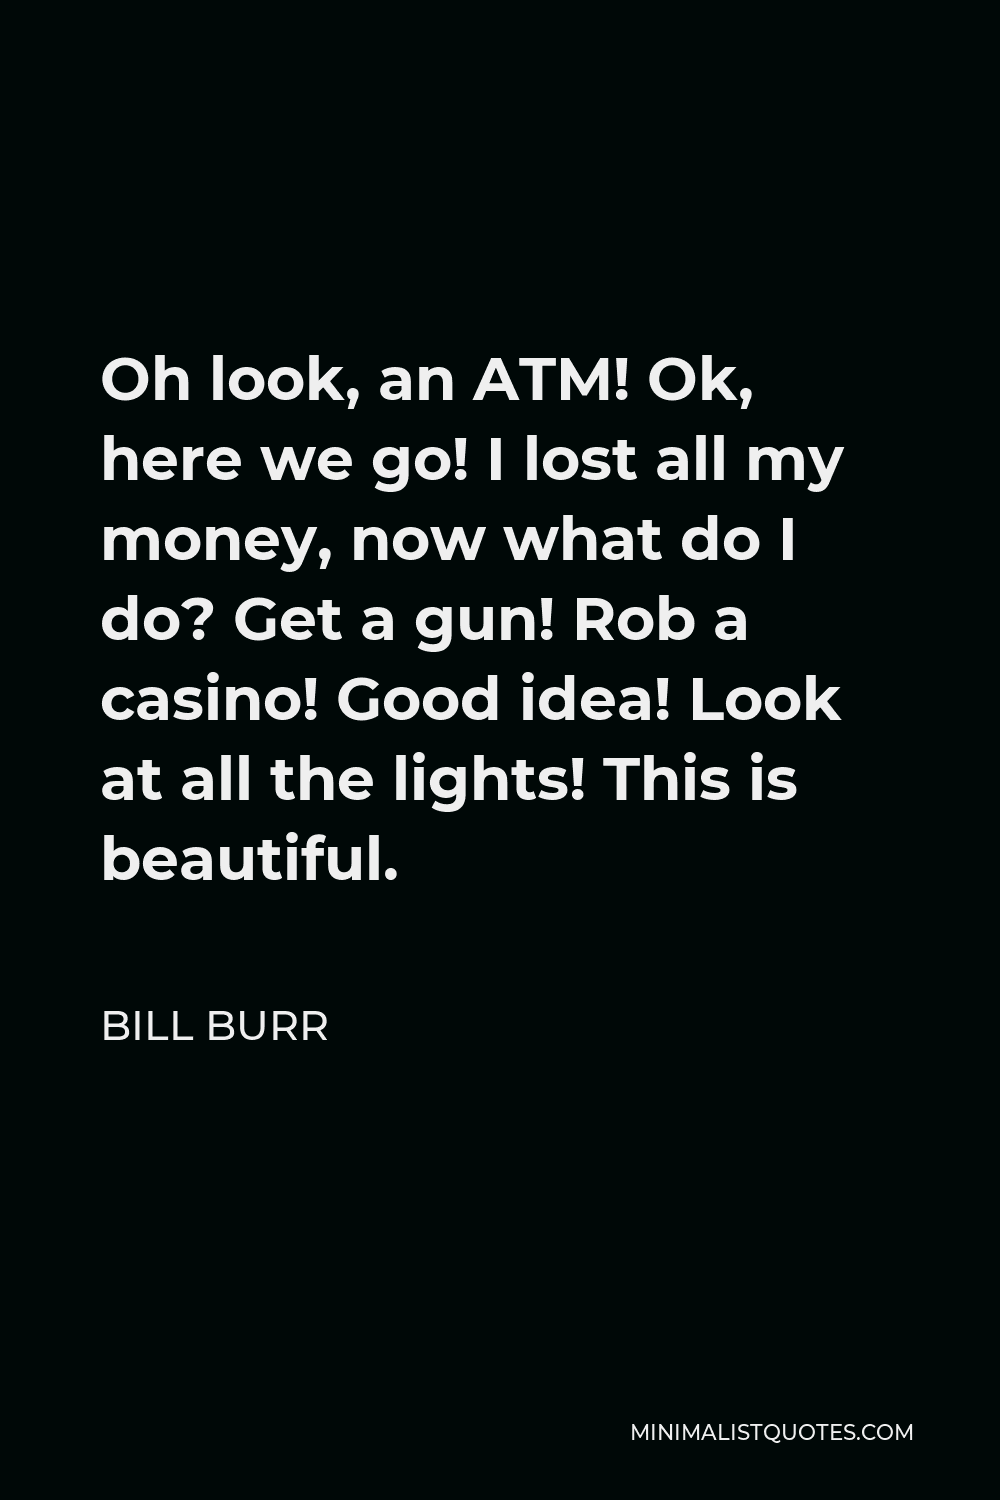 Bill Burr Quote - Oh look, an ATM! Ok, here we go! I lost all my money, now what do I do? Get a gun! Rob a casino! Good idea! Look at all the lights! This is beautiful.